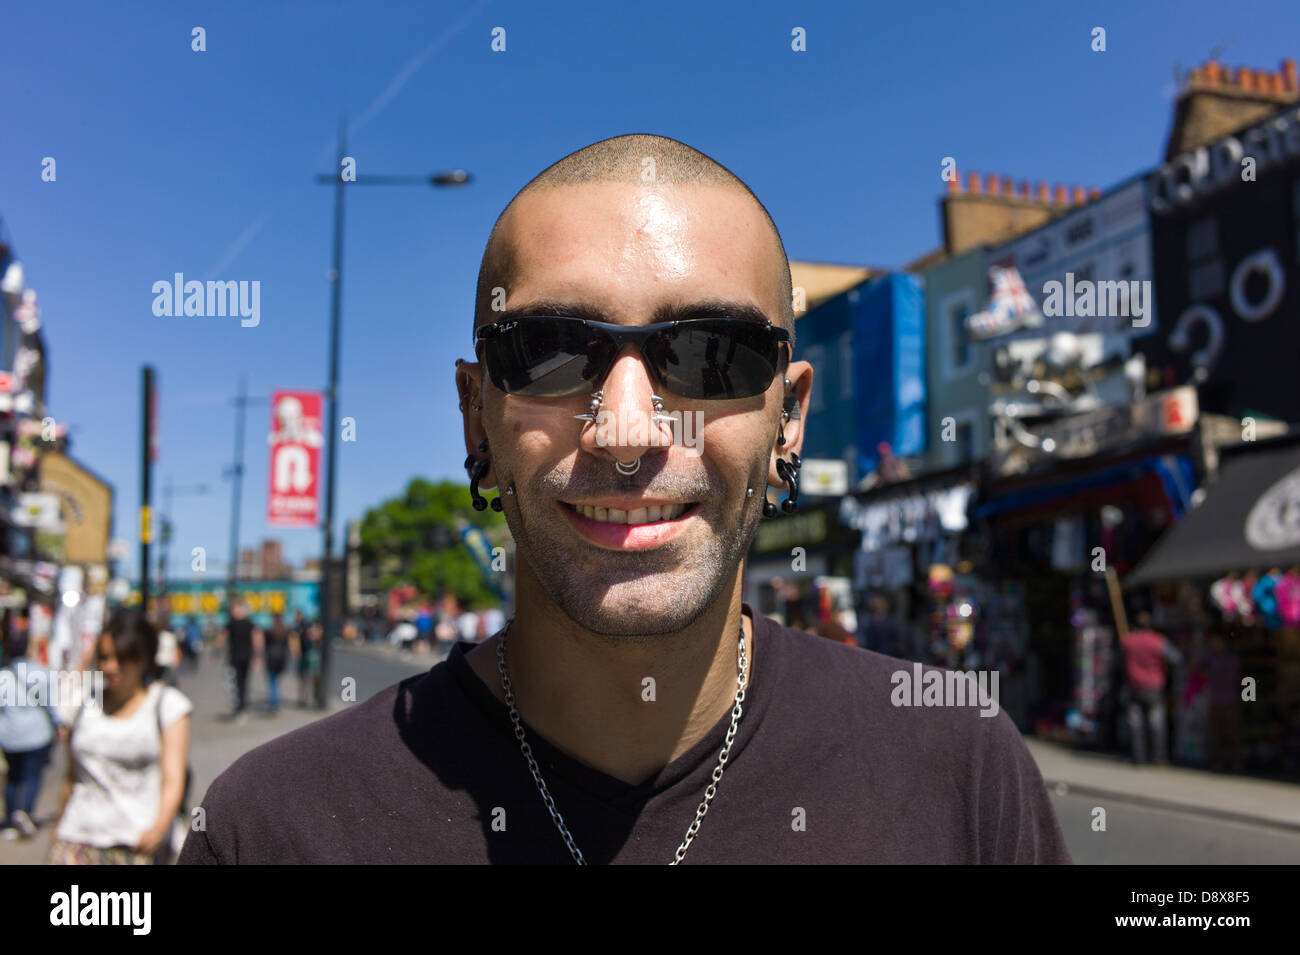 London UK, Camden Town, Camden Market, a man tourist, shopper with crew cut hair and wearing sunglasses posses for a portrait. Stock Photo